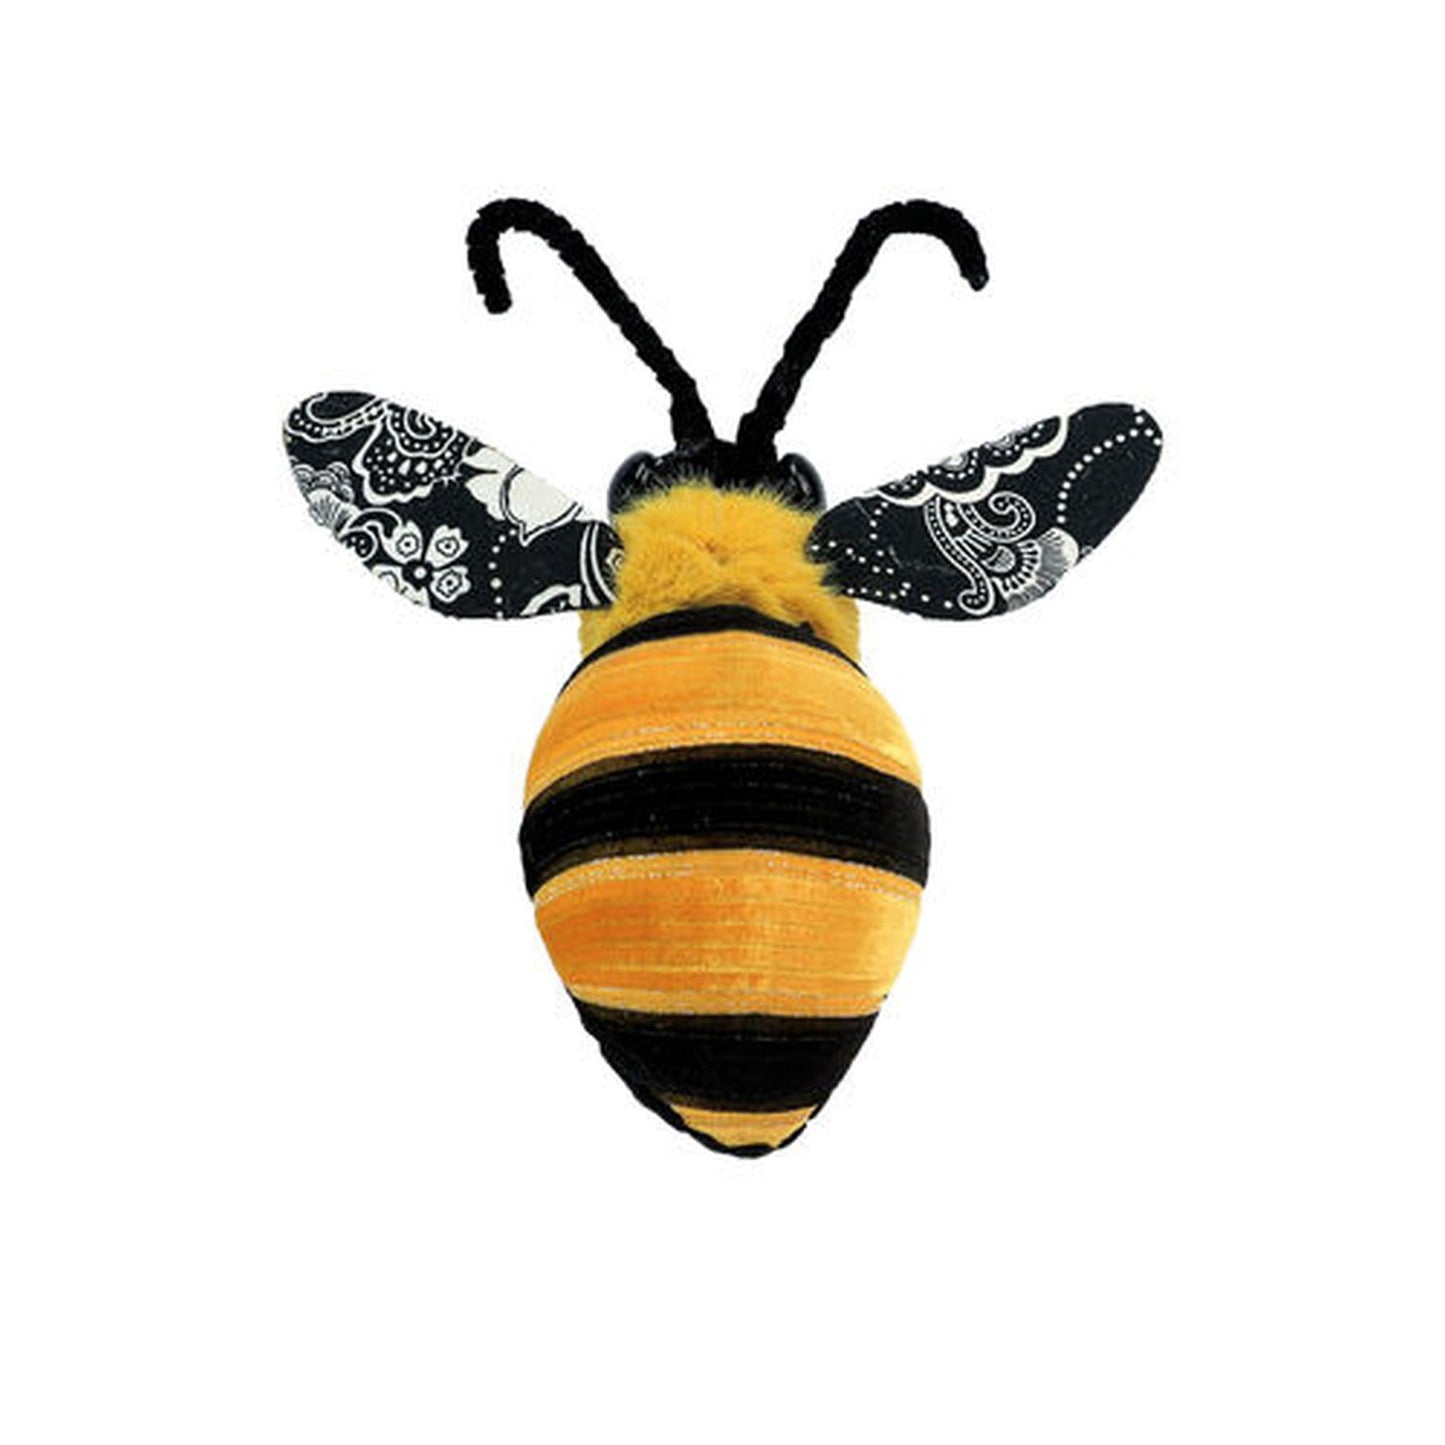 December Diamonds Honeycomb Bumble Bee With White Paisley Ornament